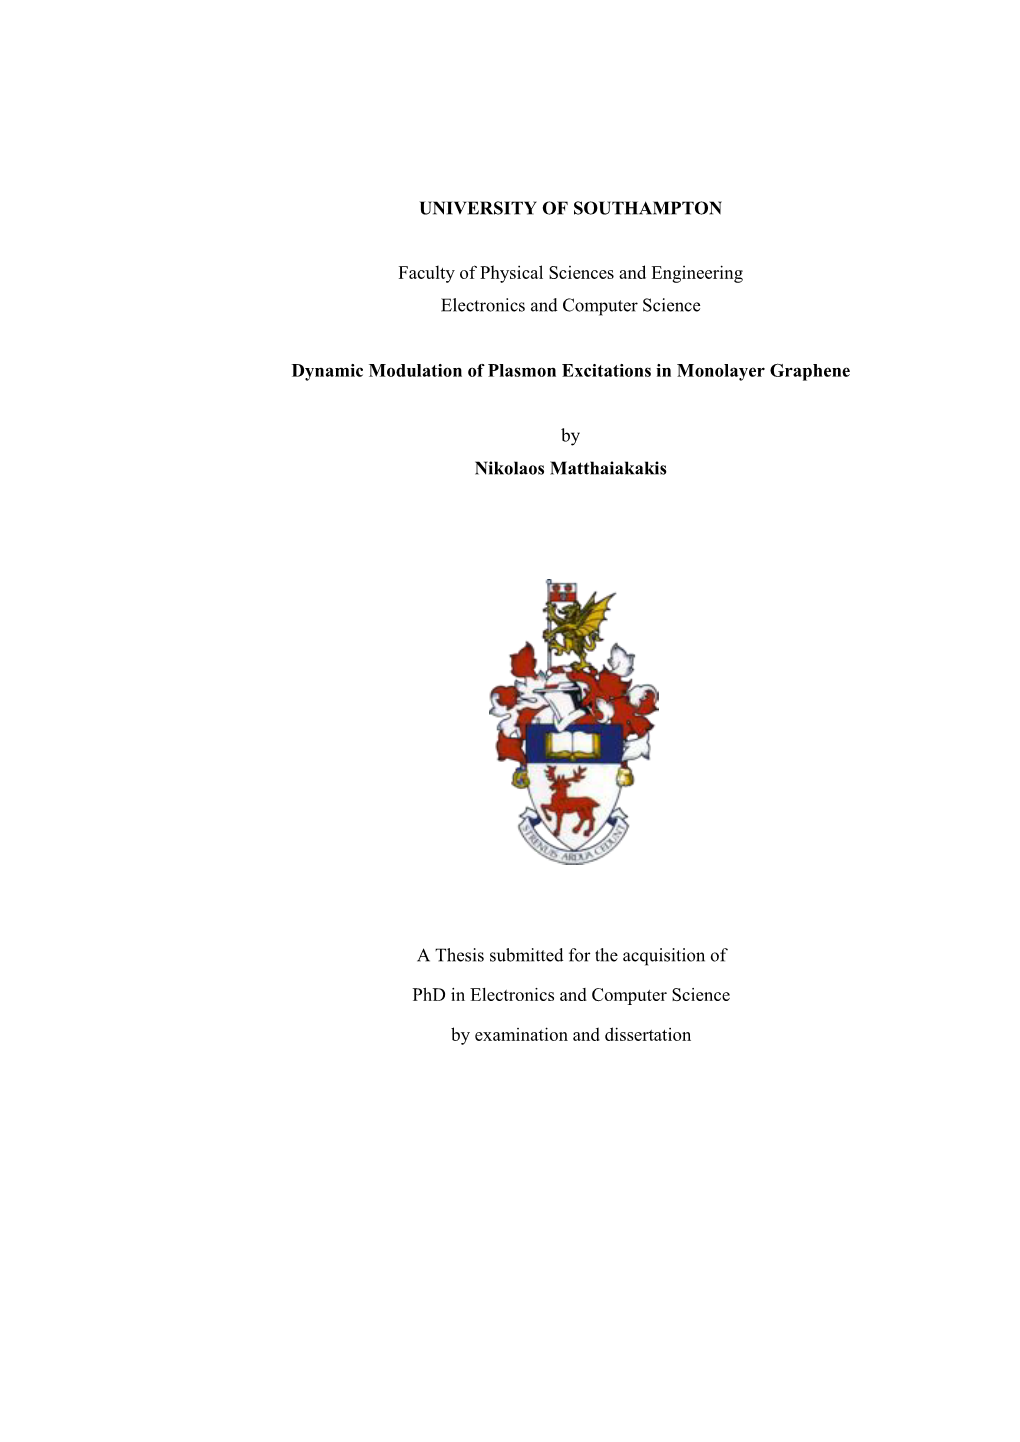 A Thesis Submitted for the Acquisition of Phd in Electronics and Computer